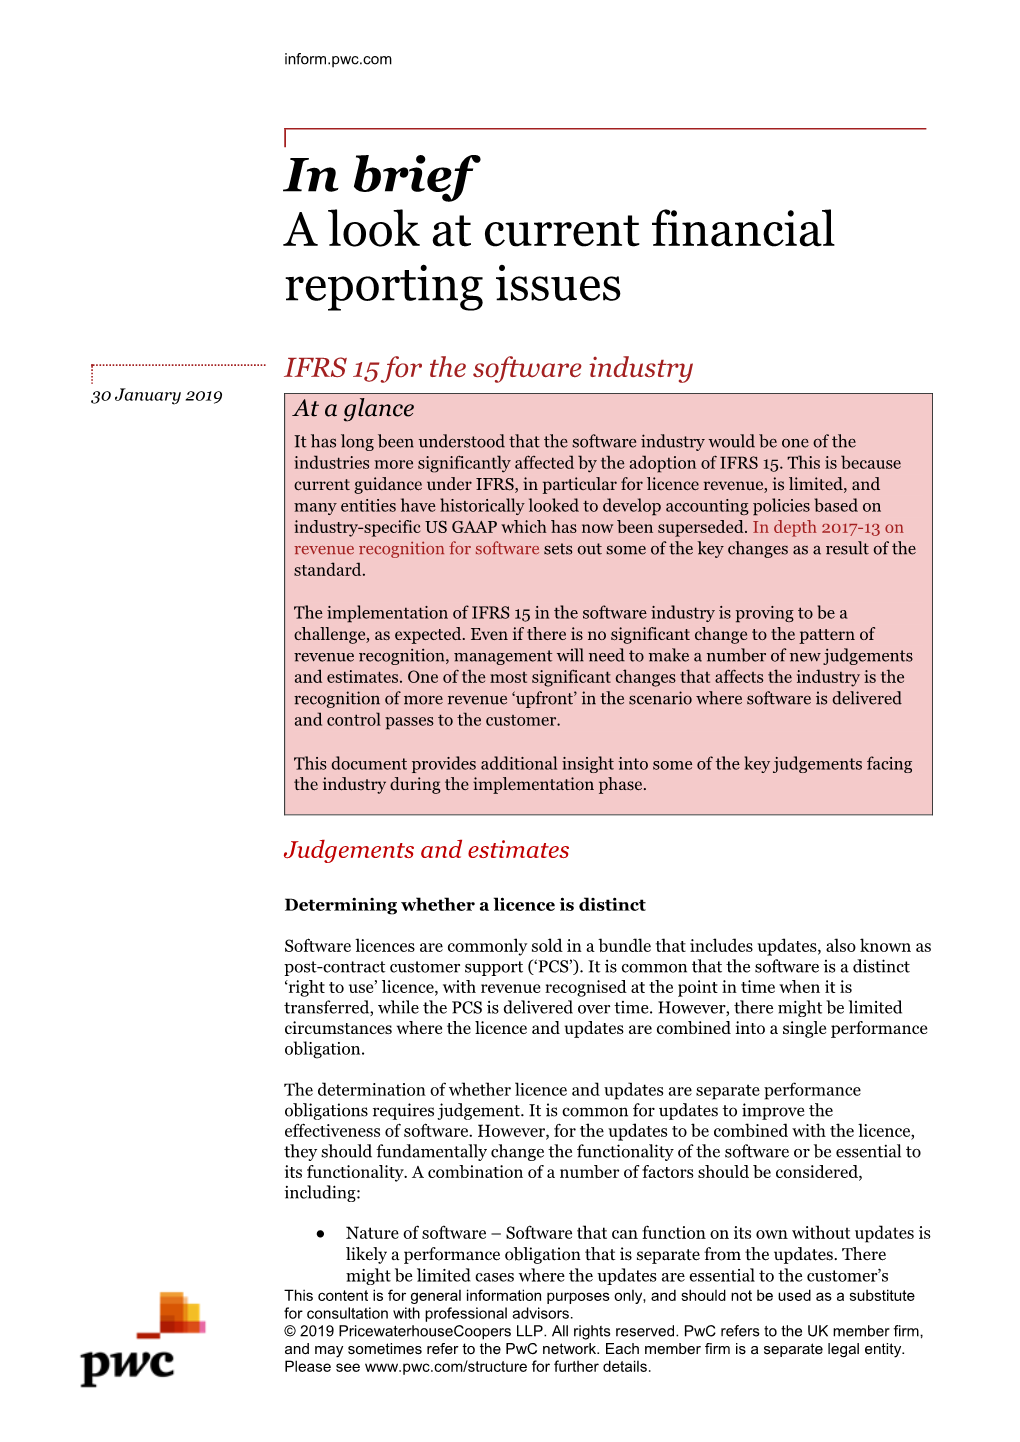 IFRS 15 for the Software Industry: Pwc in Brief